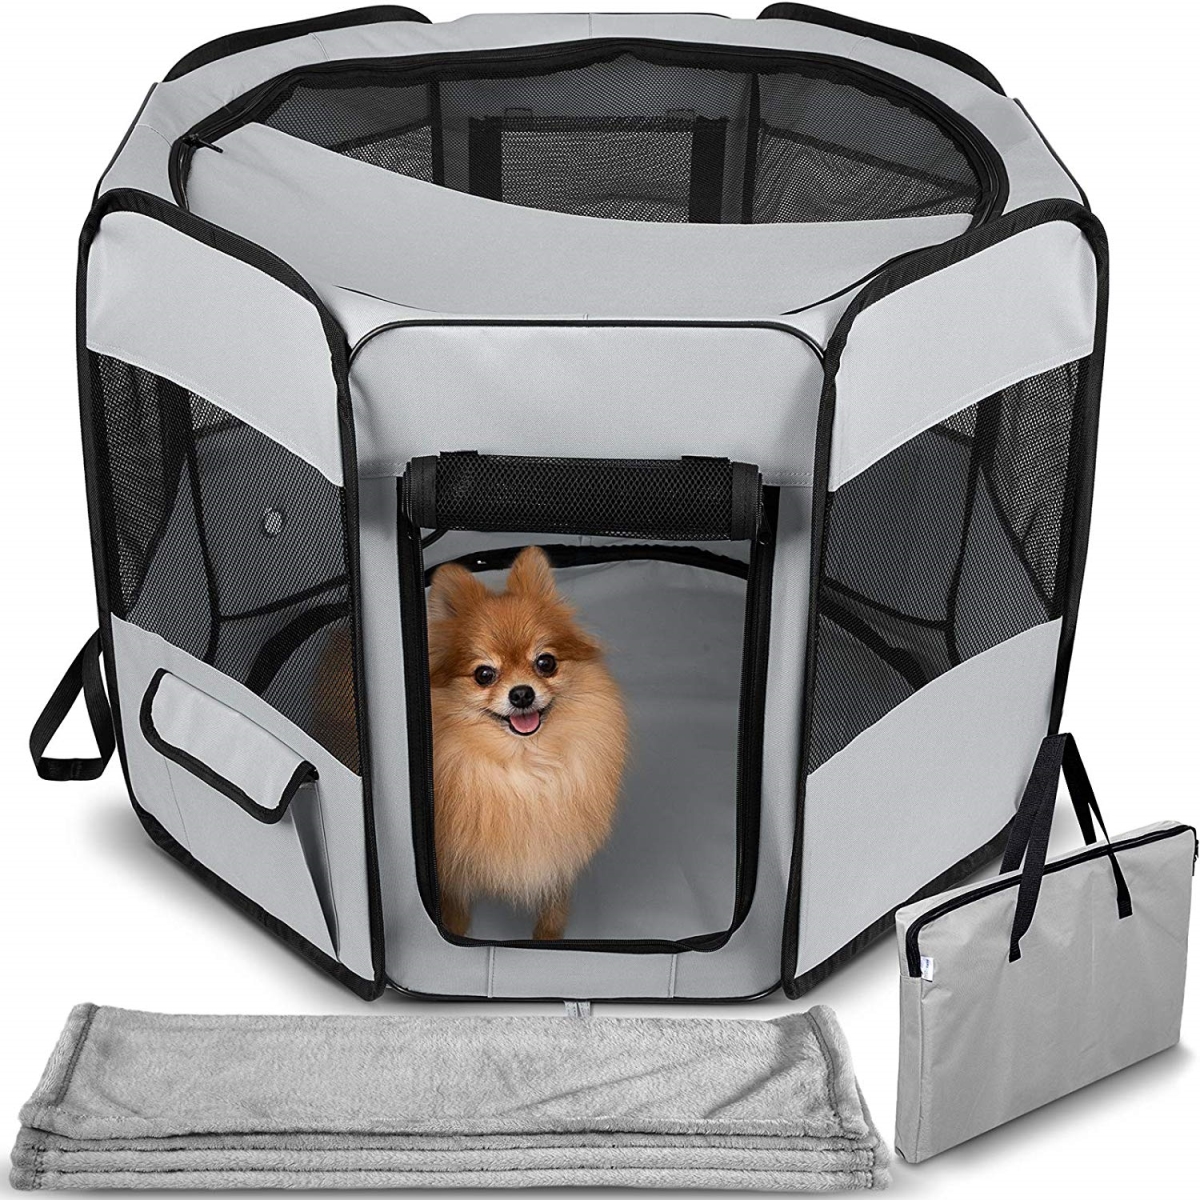 260021 Portable Dog Playpen With Blanket, Gray